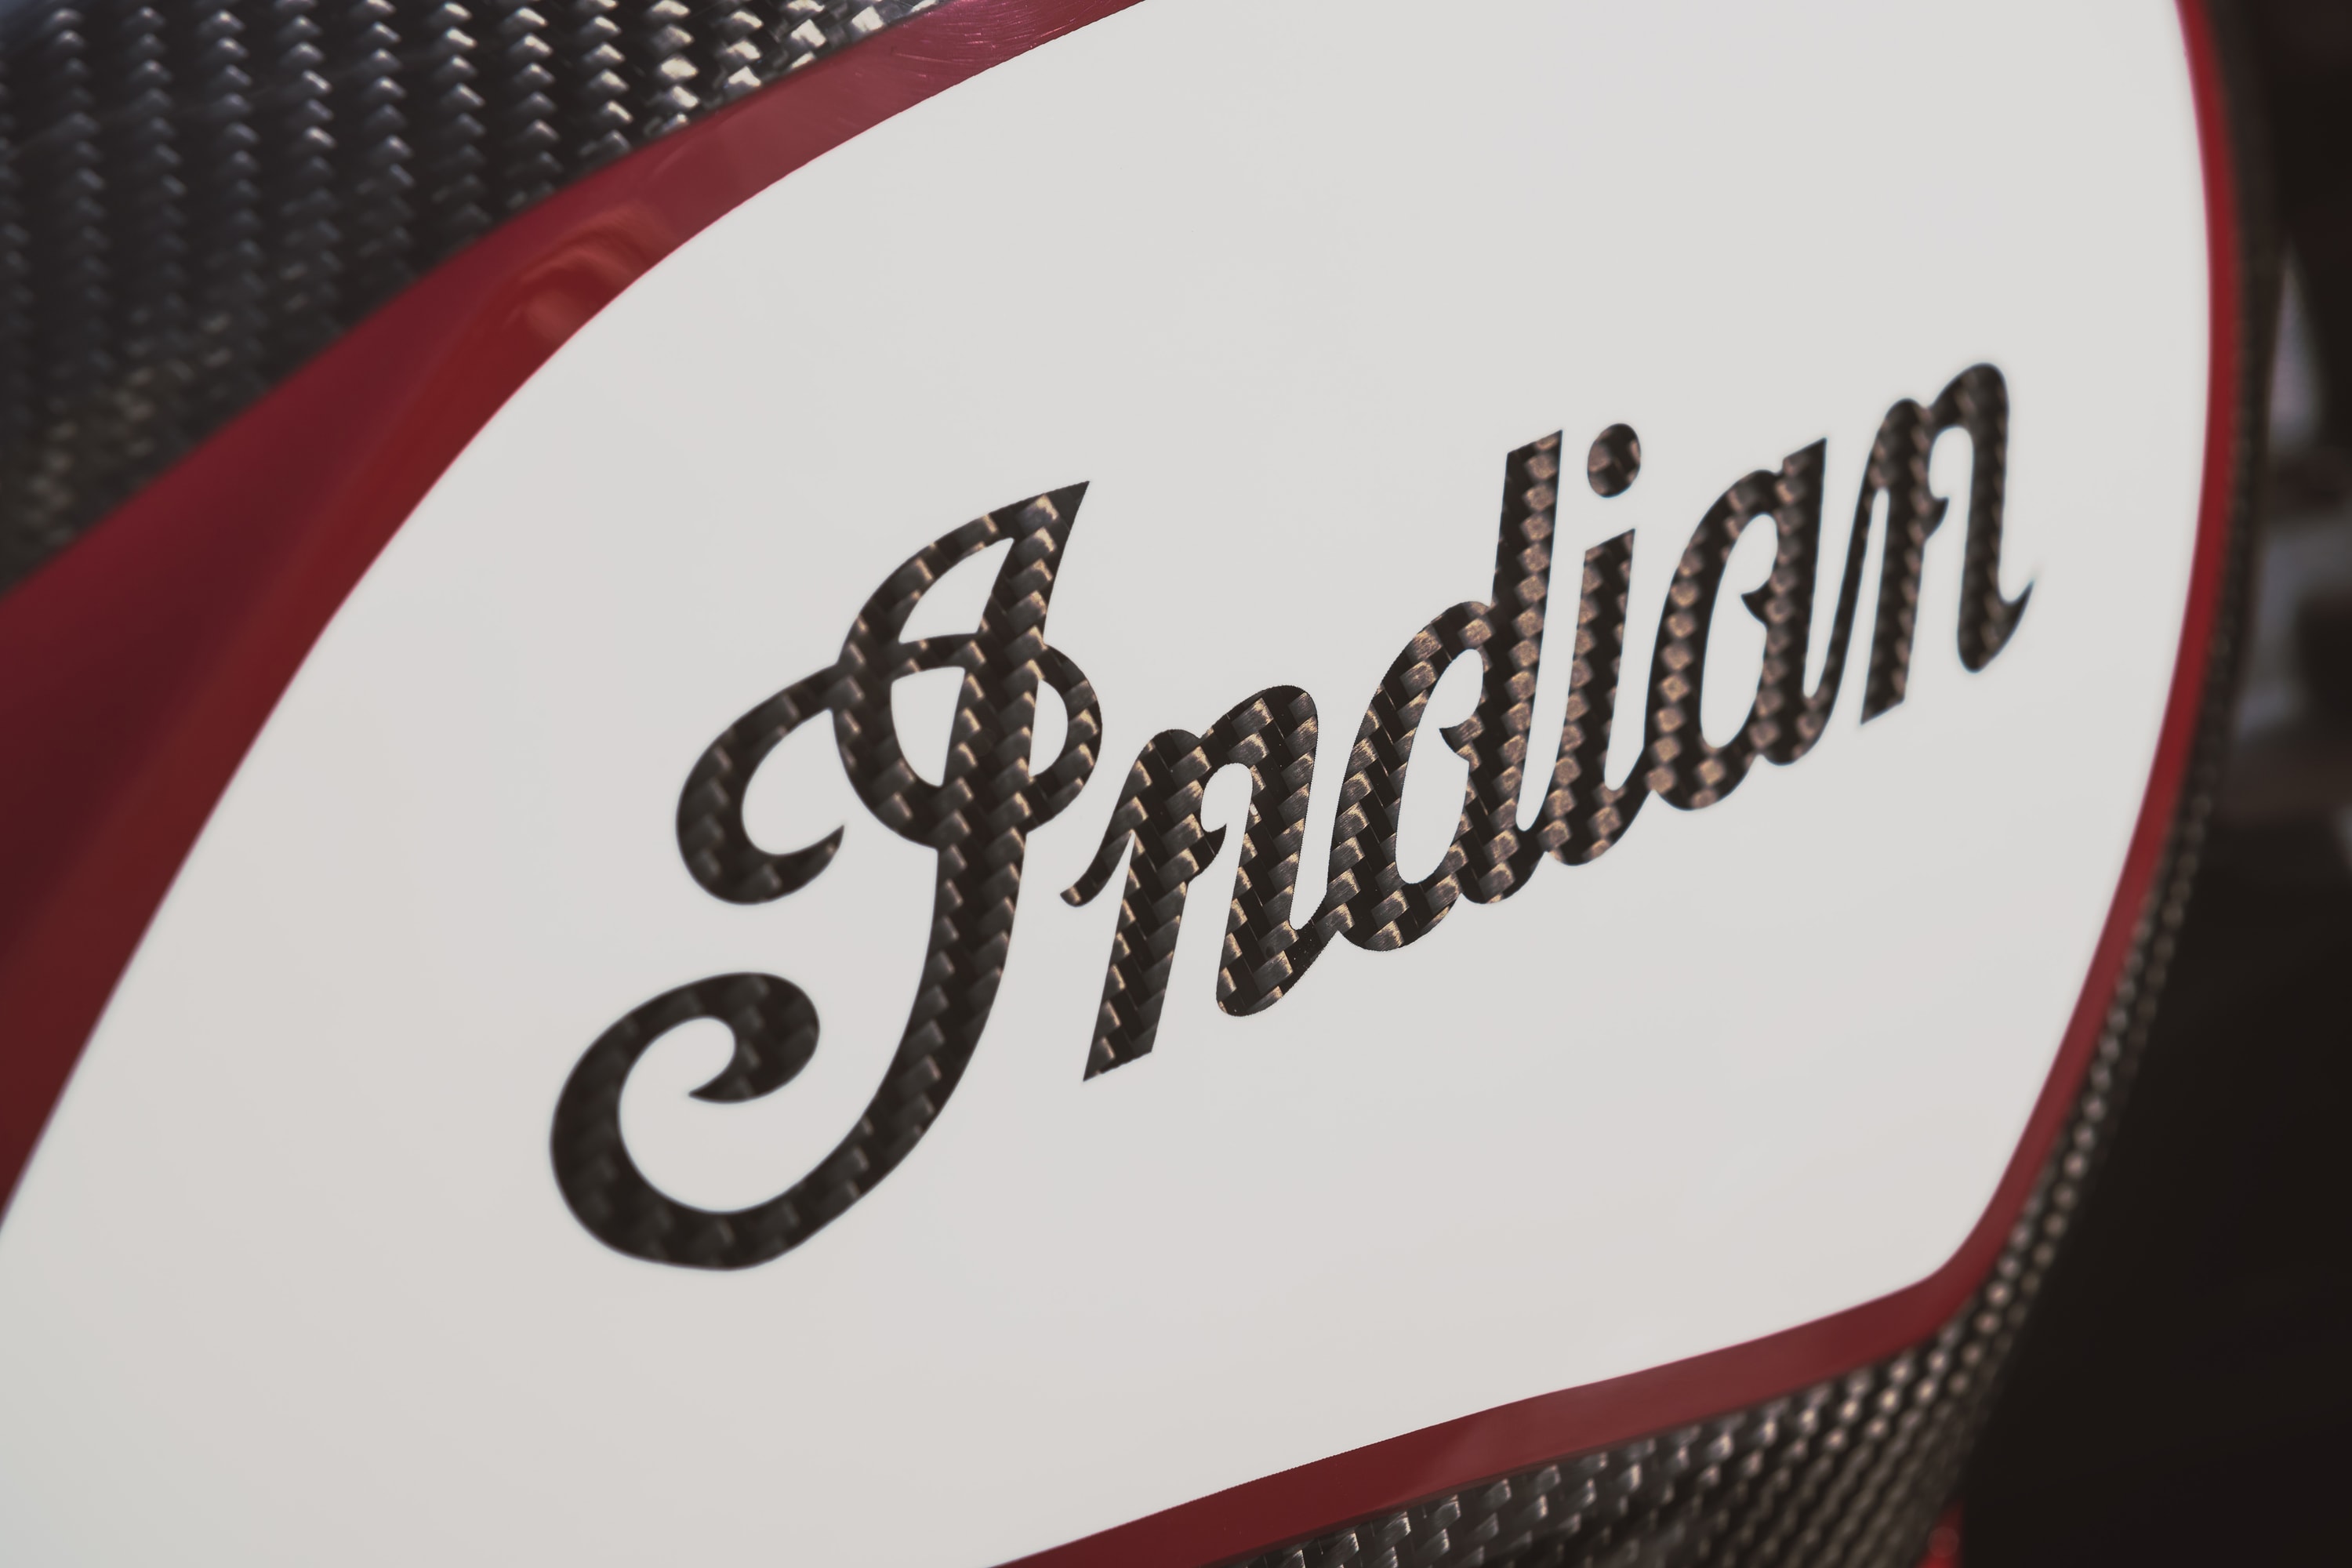 Indian Motorcycle 推出 2020 年式樣 FTR 1200 Carbon 車款